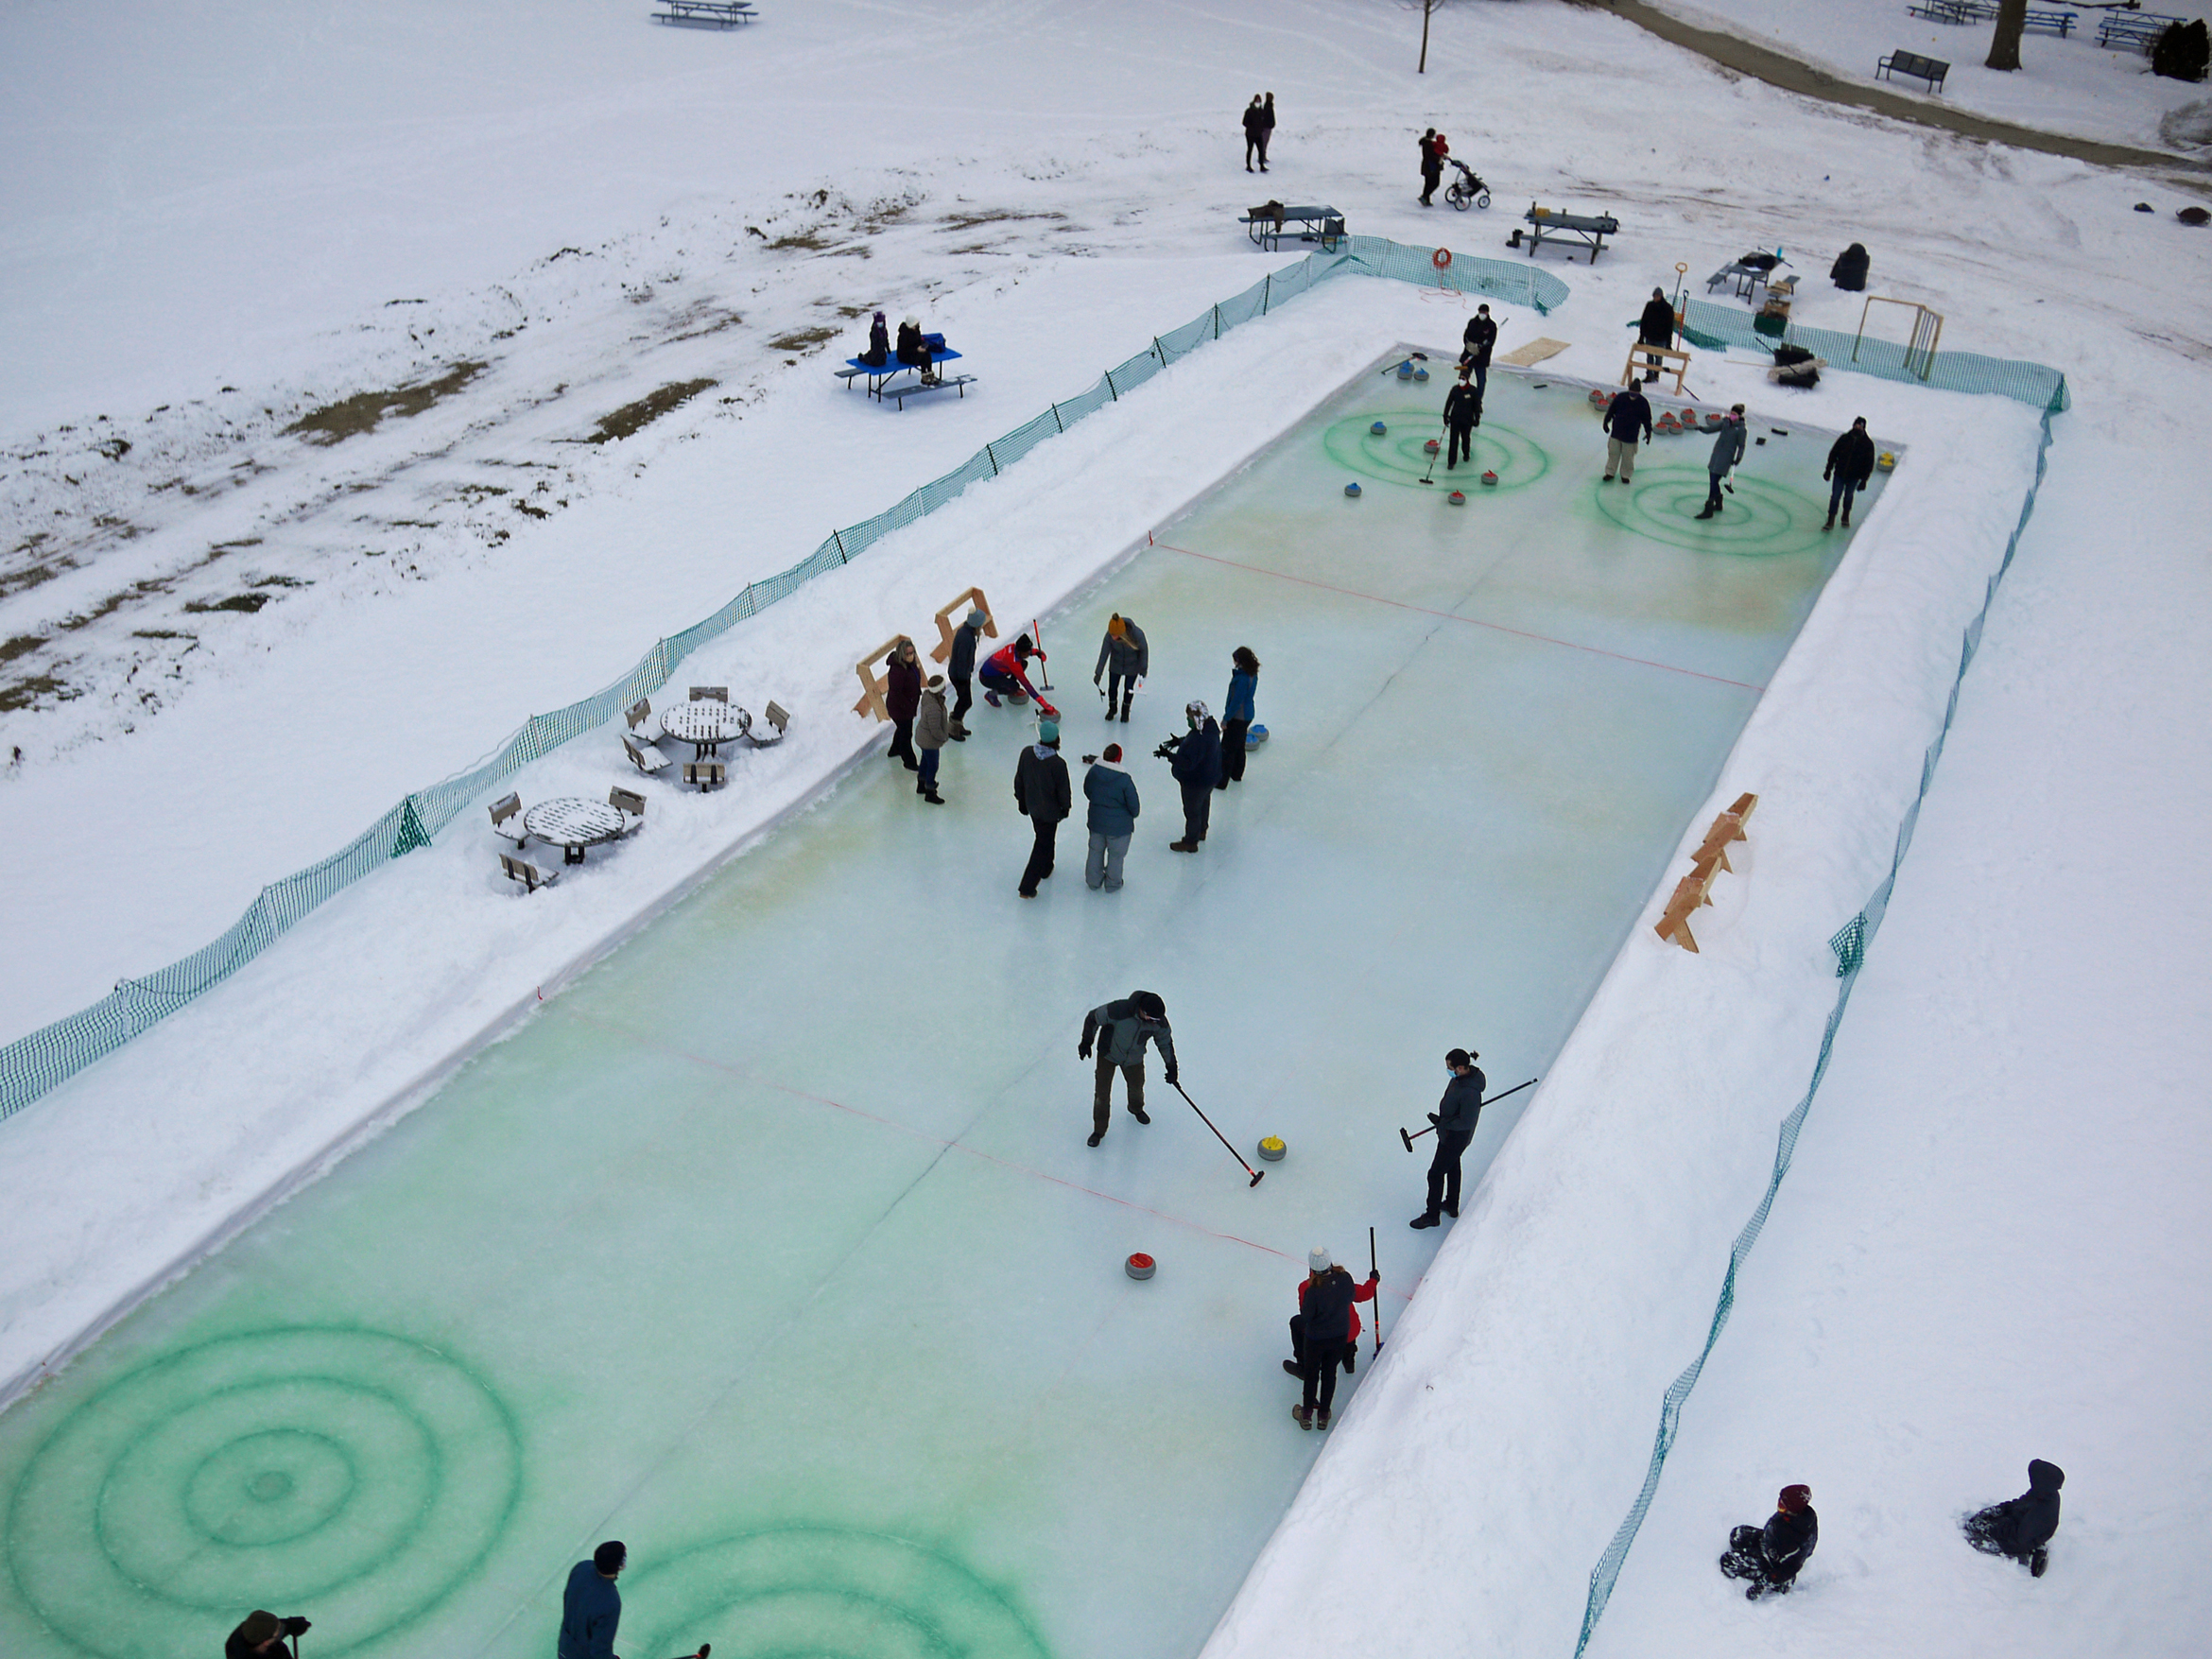 Curlers practice skills on a built-in sheet of ice at a park in Monona